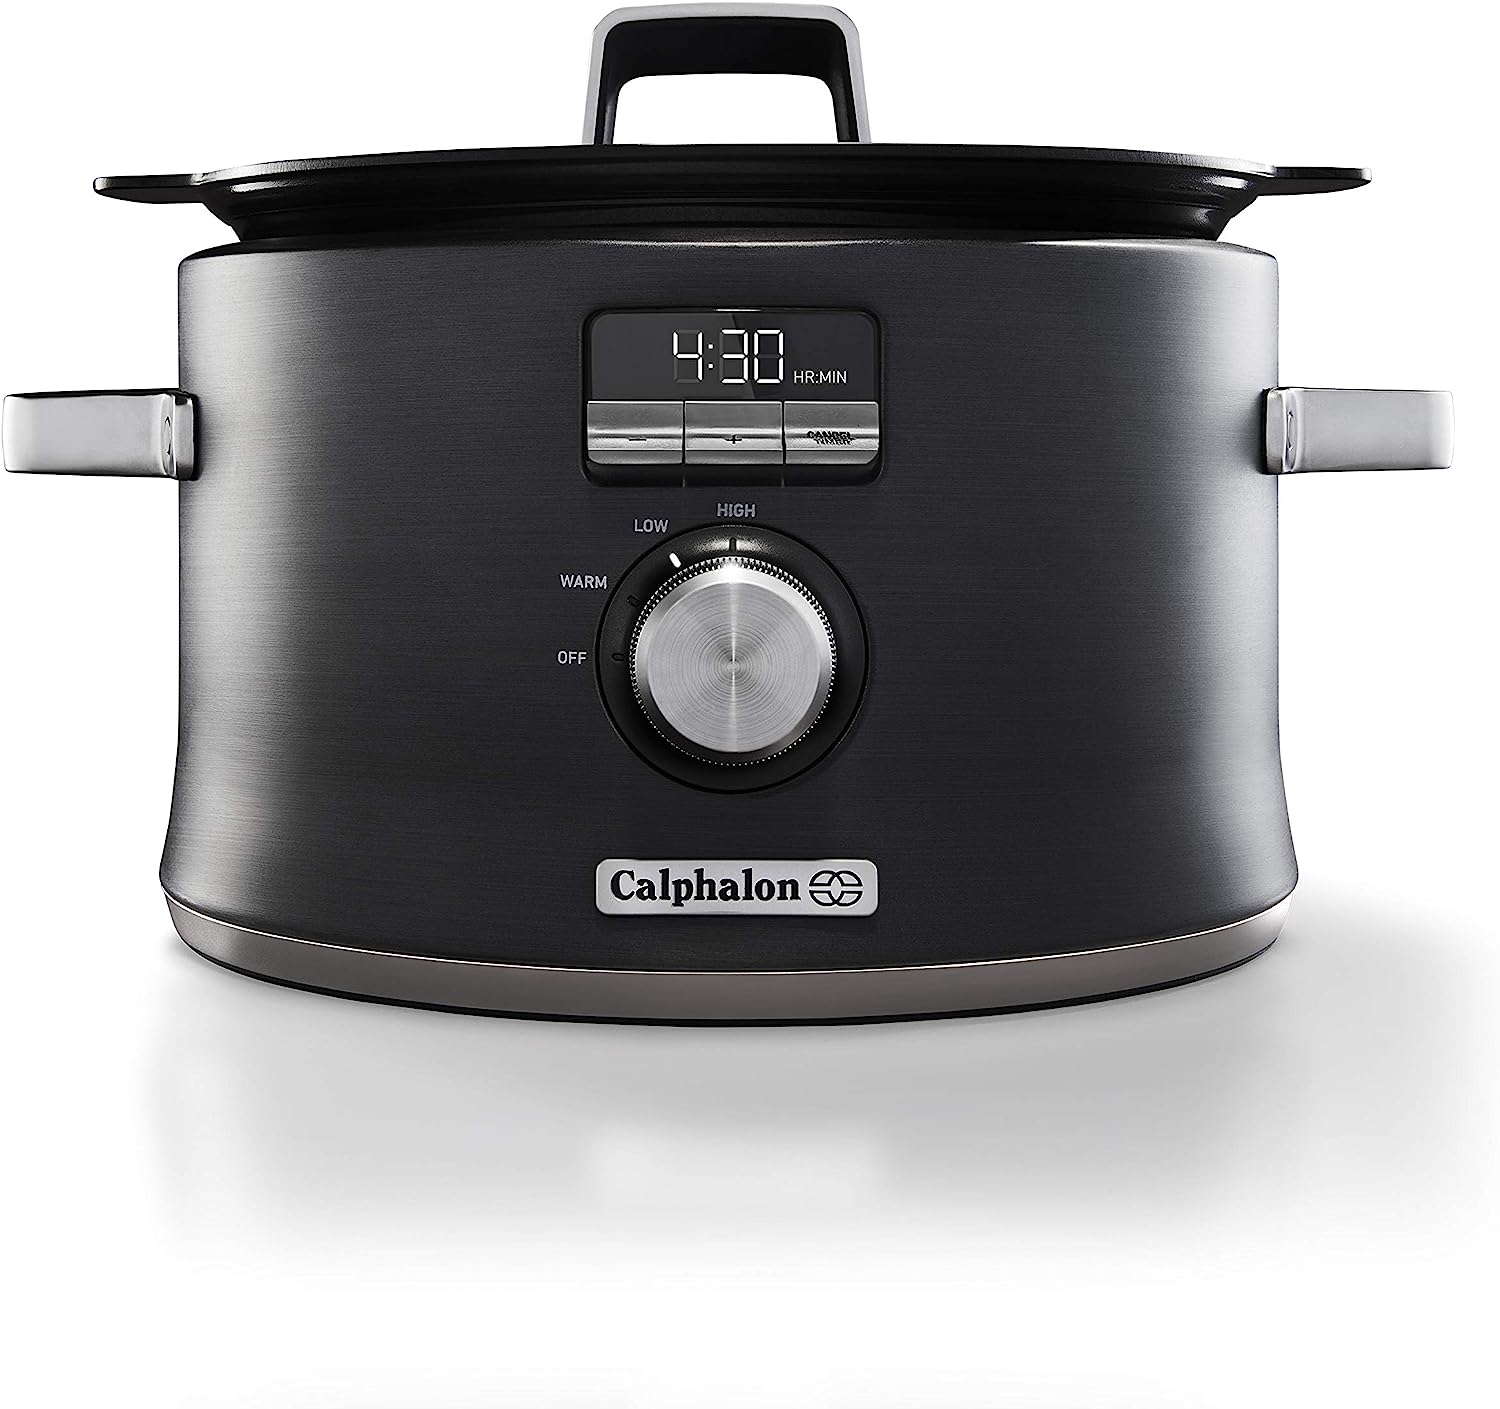 Calphalon Slow Cooker with Digital Timer and Programmable Controls, 5.3 Quarts